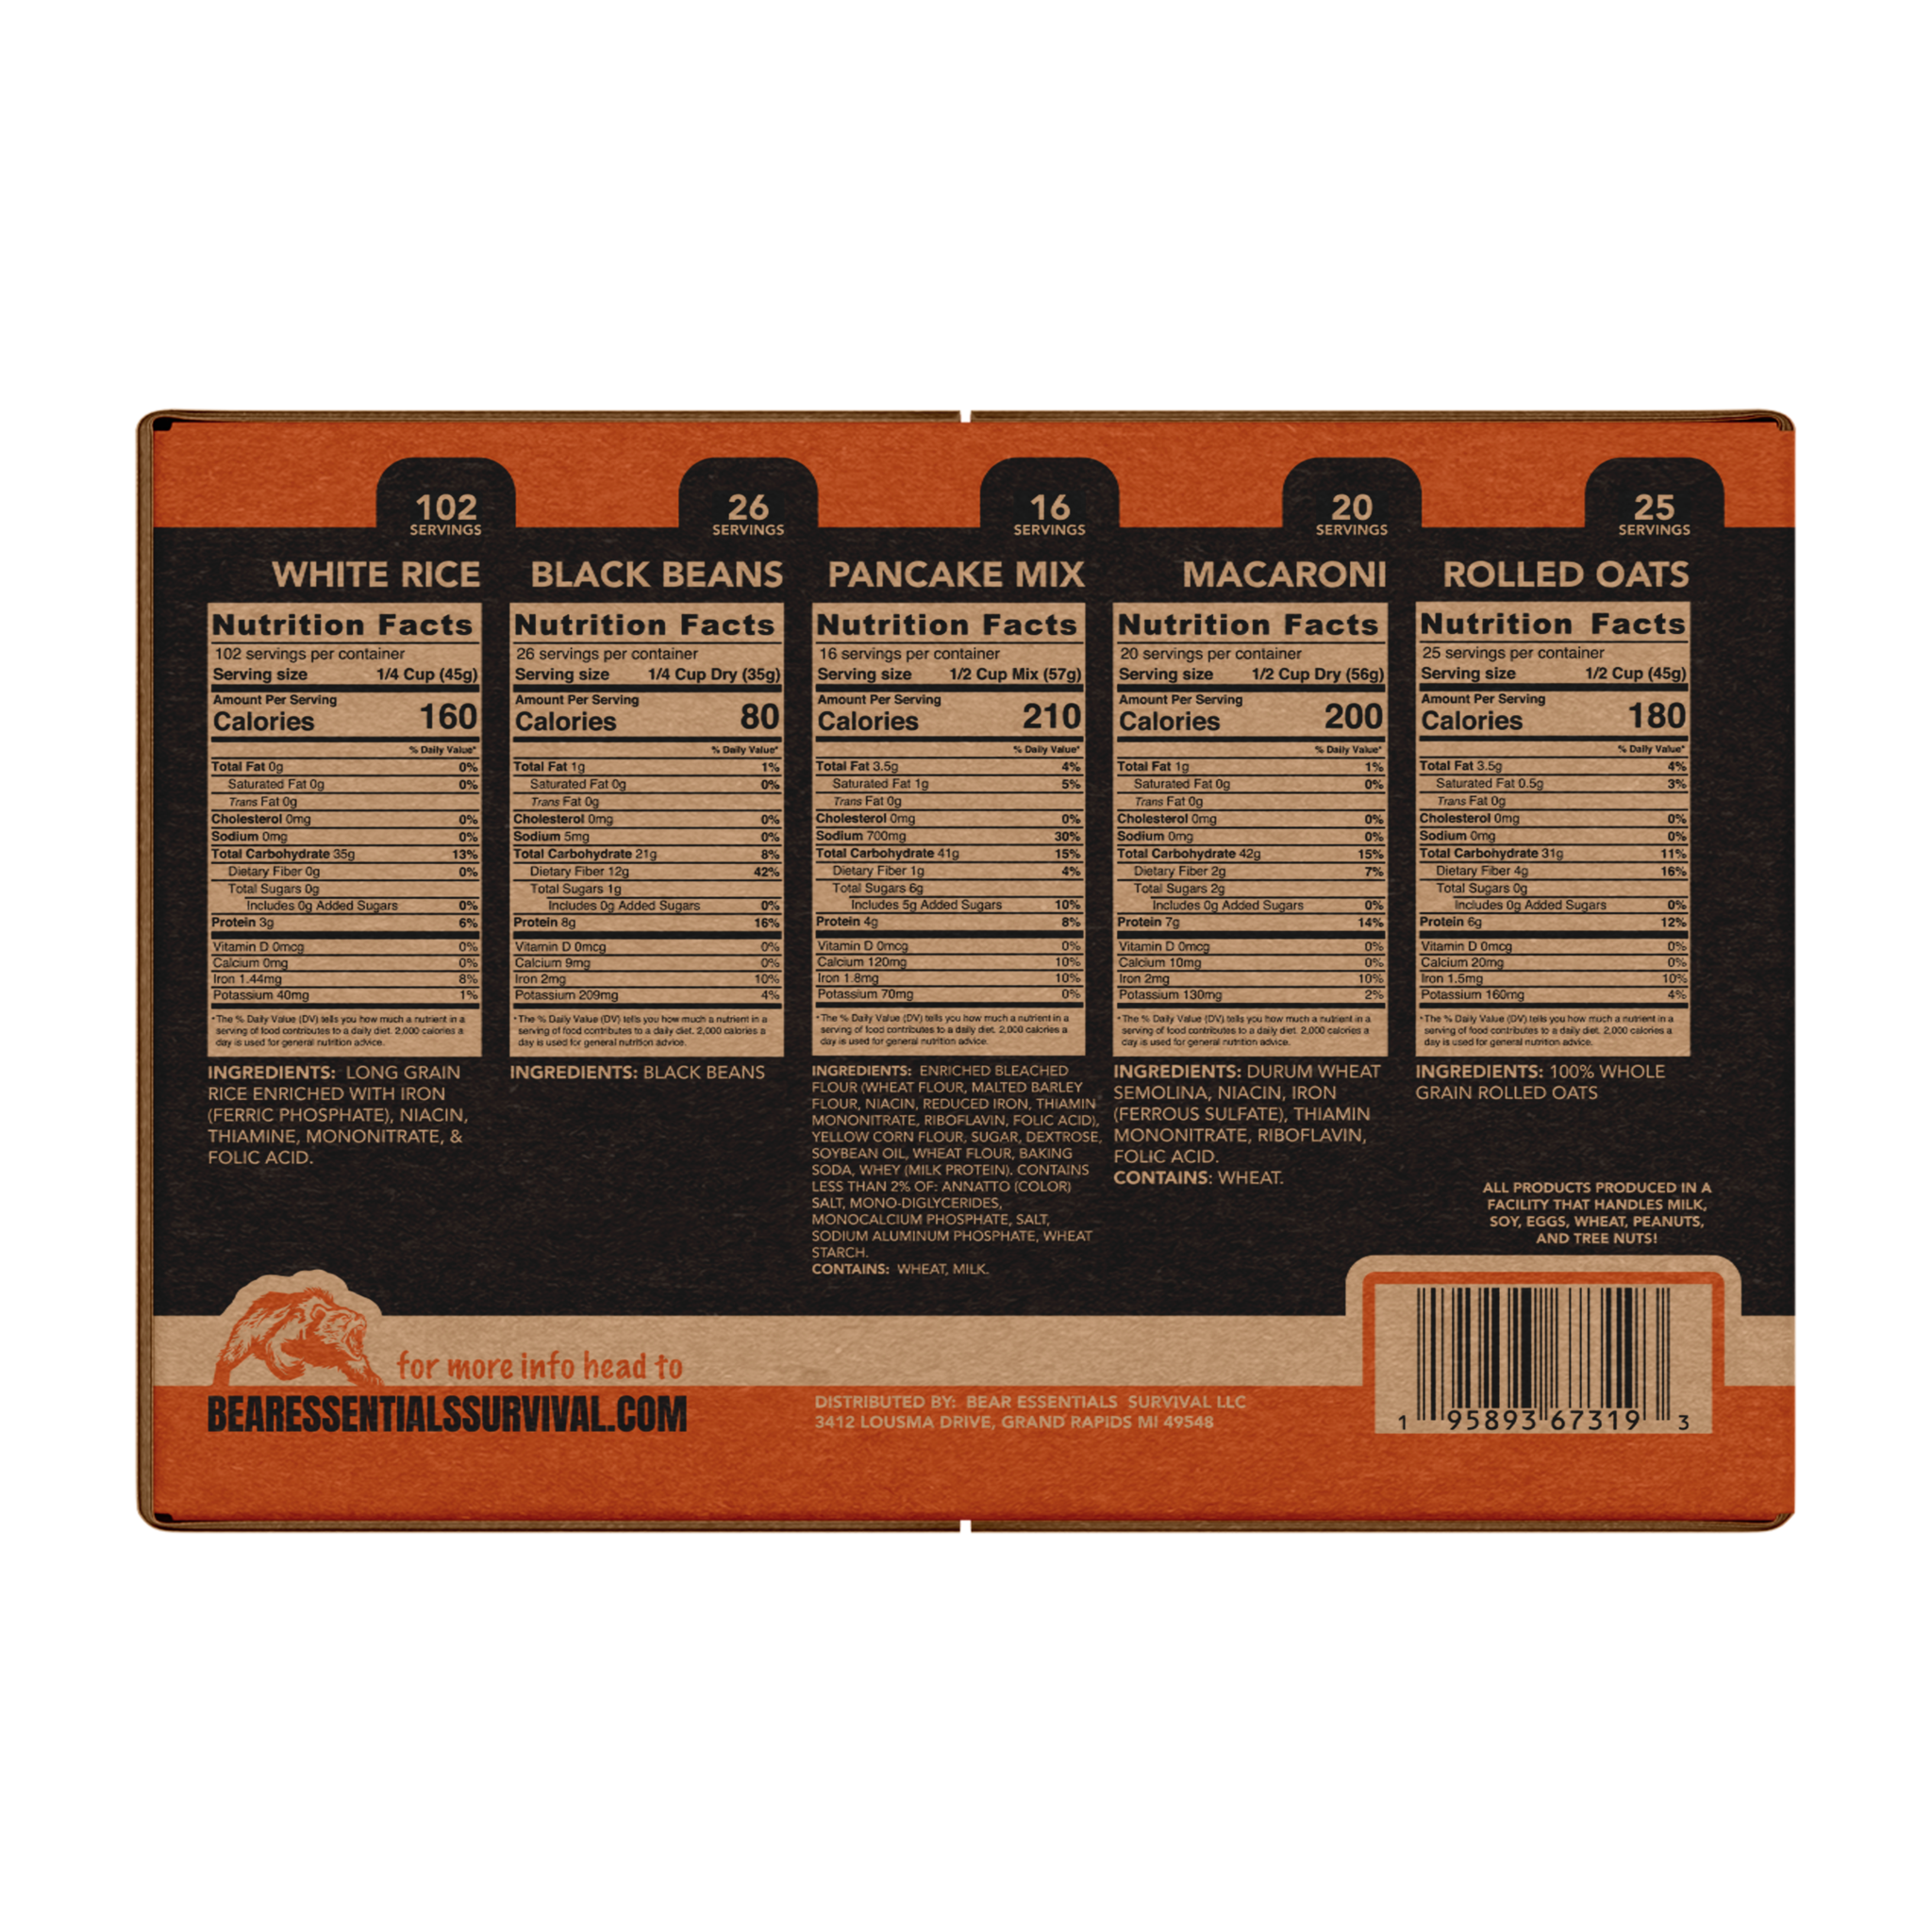 A black and orange Bear Essentials Survival 15 Day Emergency Food Supply Box - 189 Servings - (SHIPS IN 1-4 WEEKS) package of food.